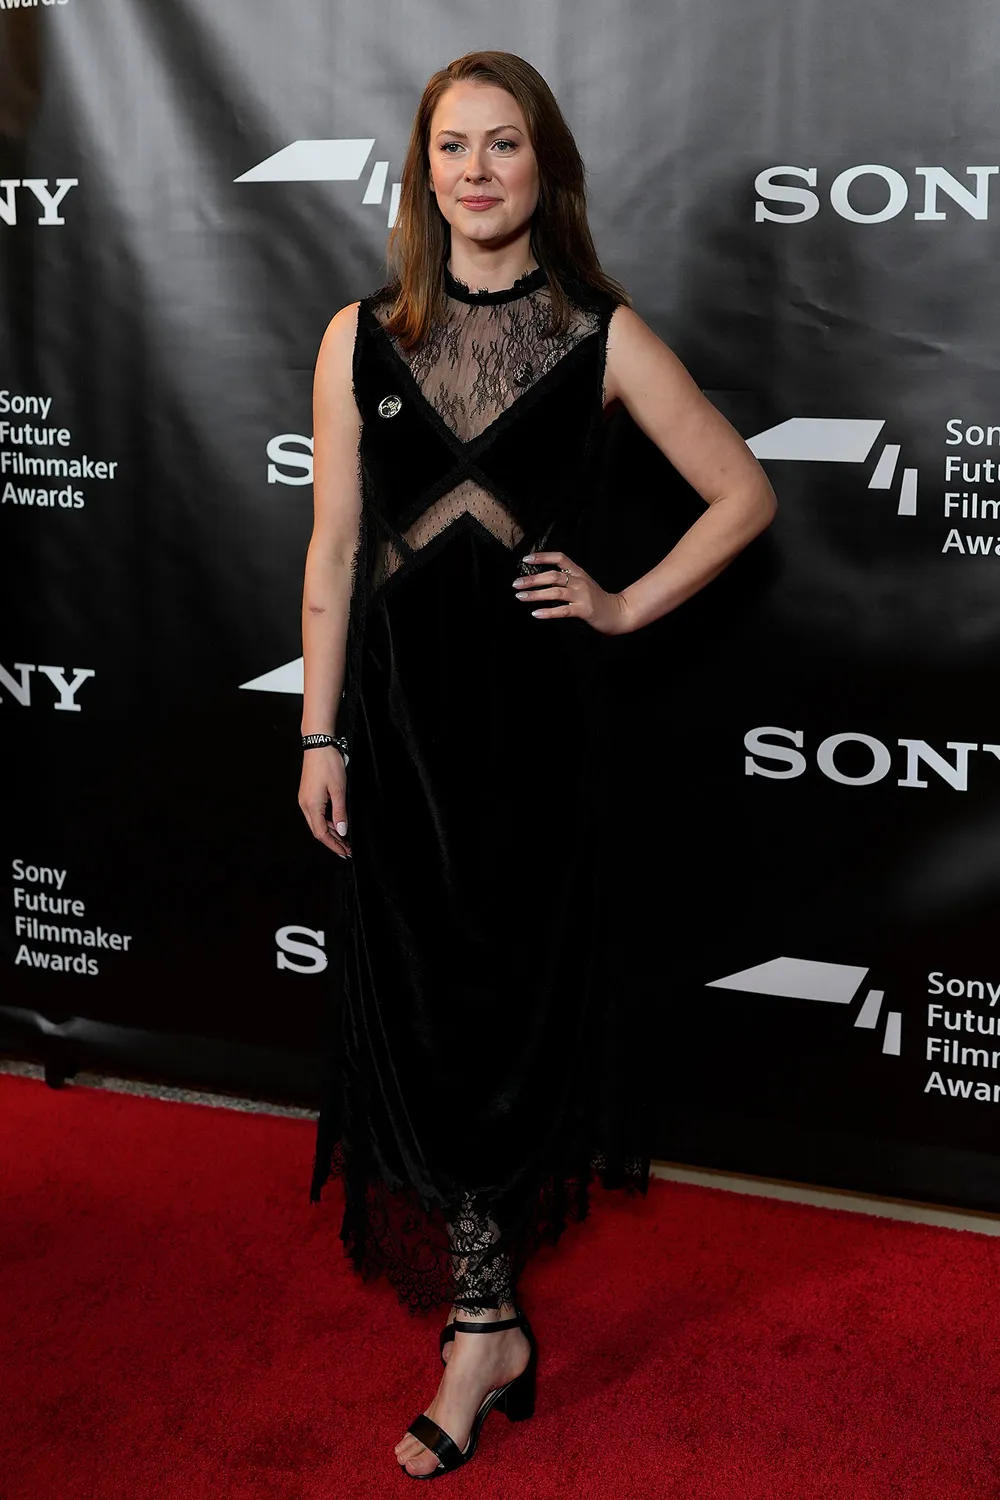 Joy Webster on the red carpet at the Sony Future Filmmaker Awards